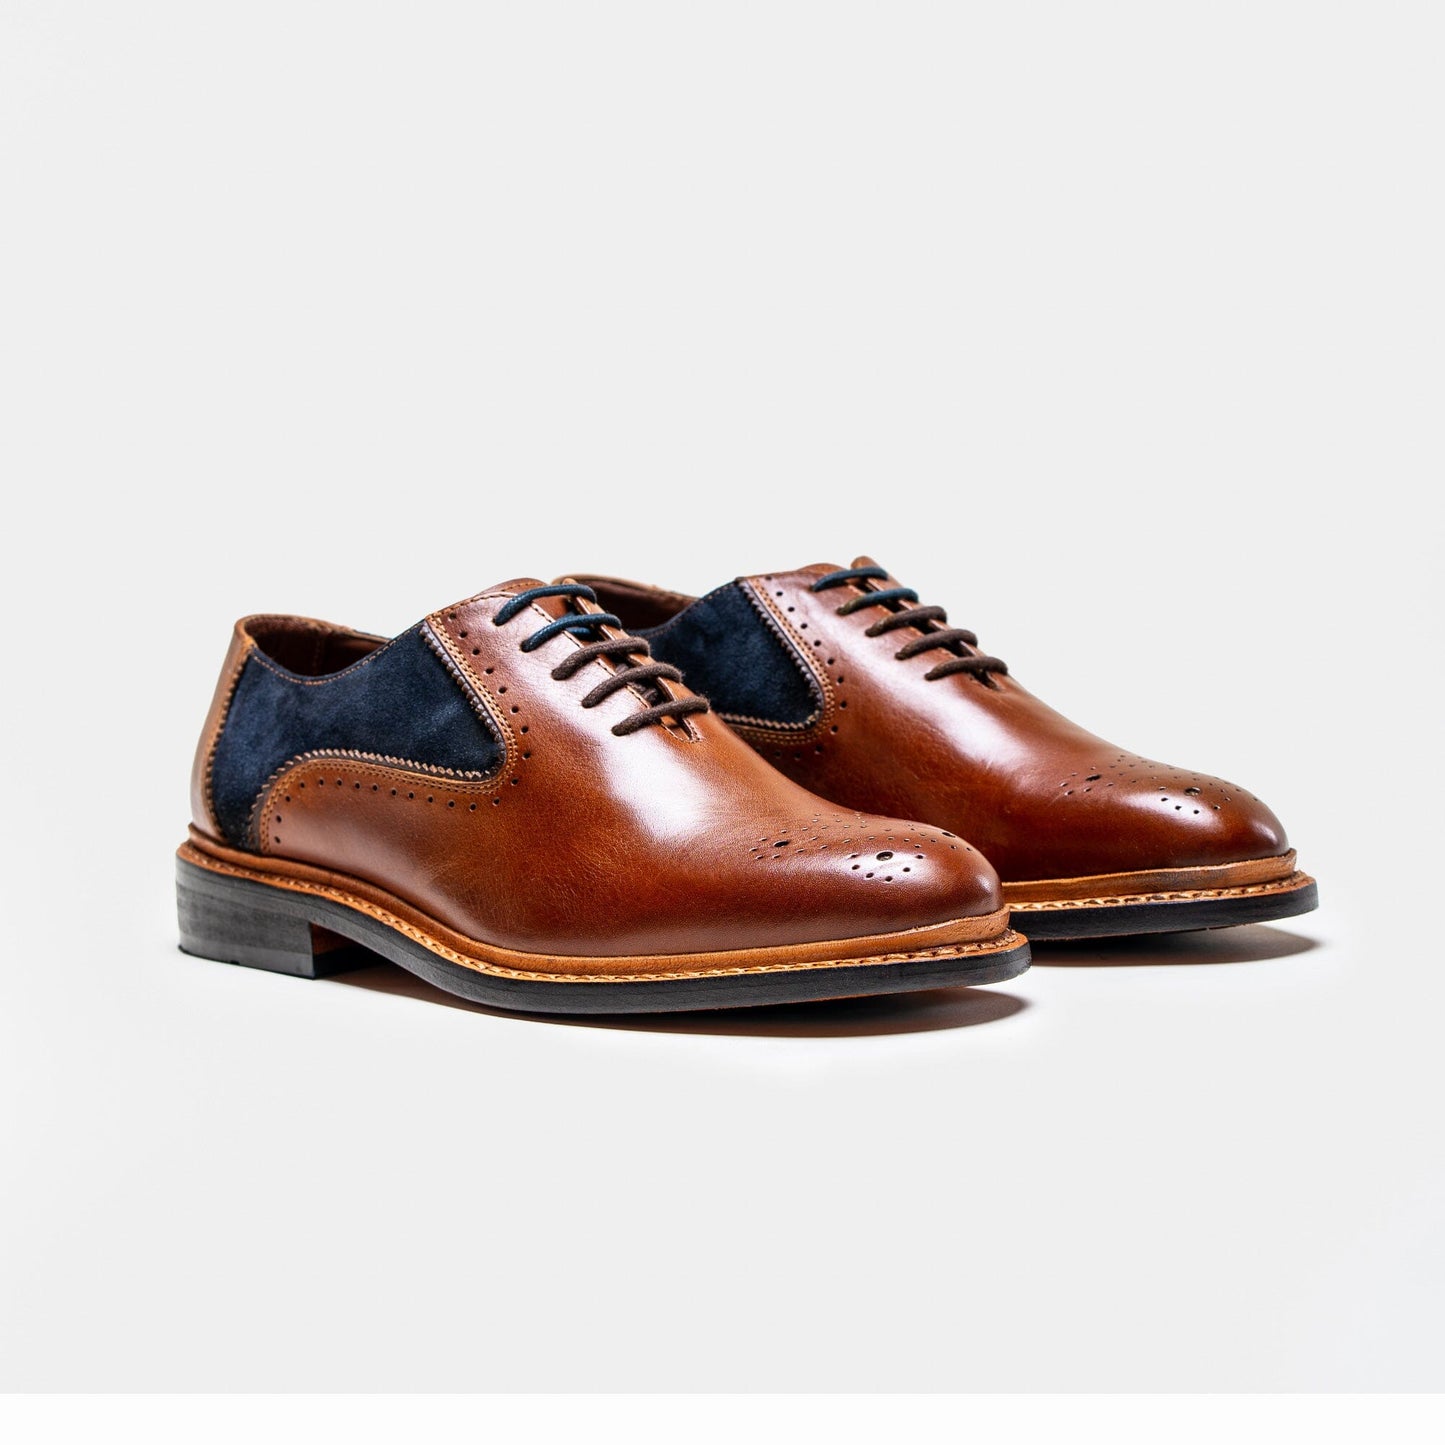 Brentwood Tan & Navy Shoes - Shoes - - THREADPEPPER